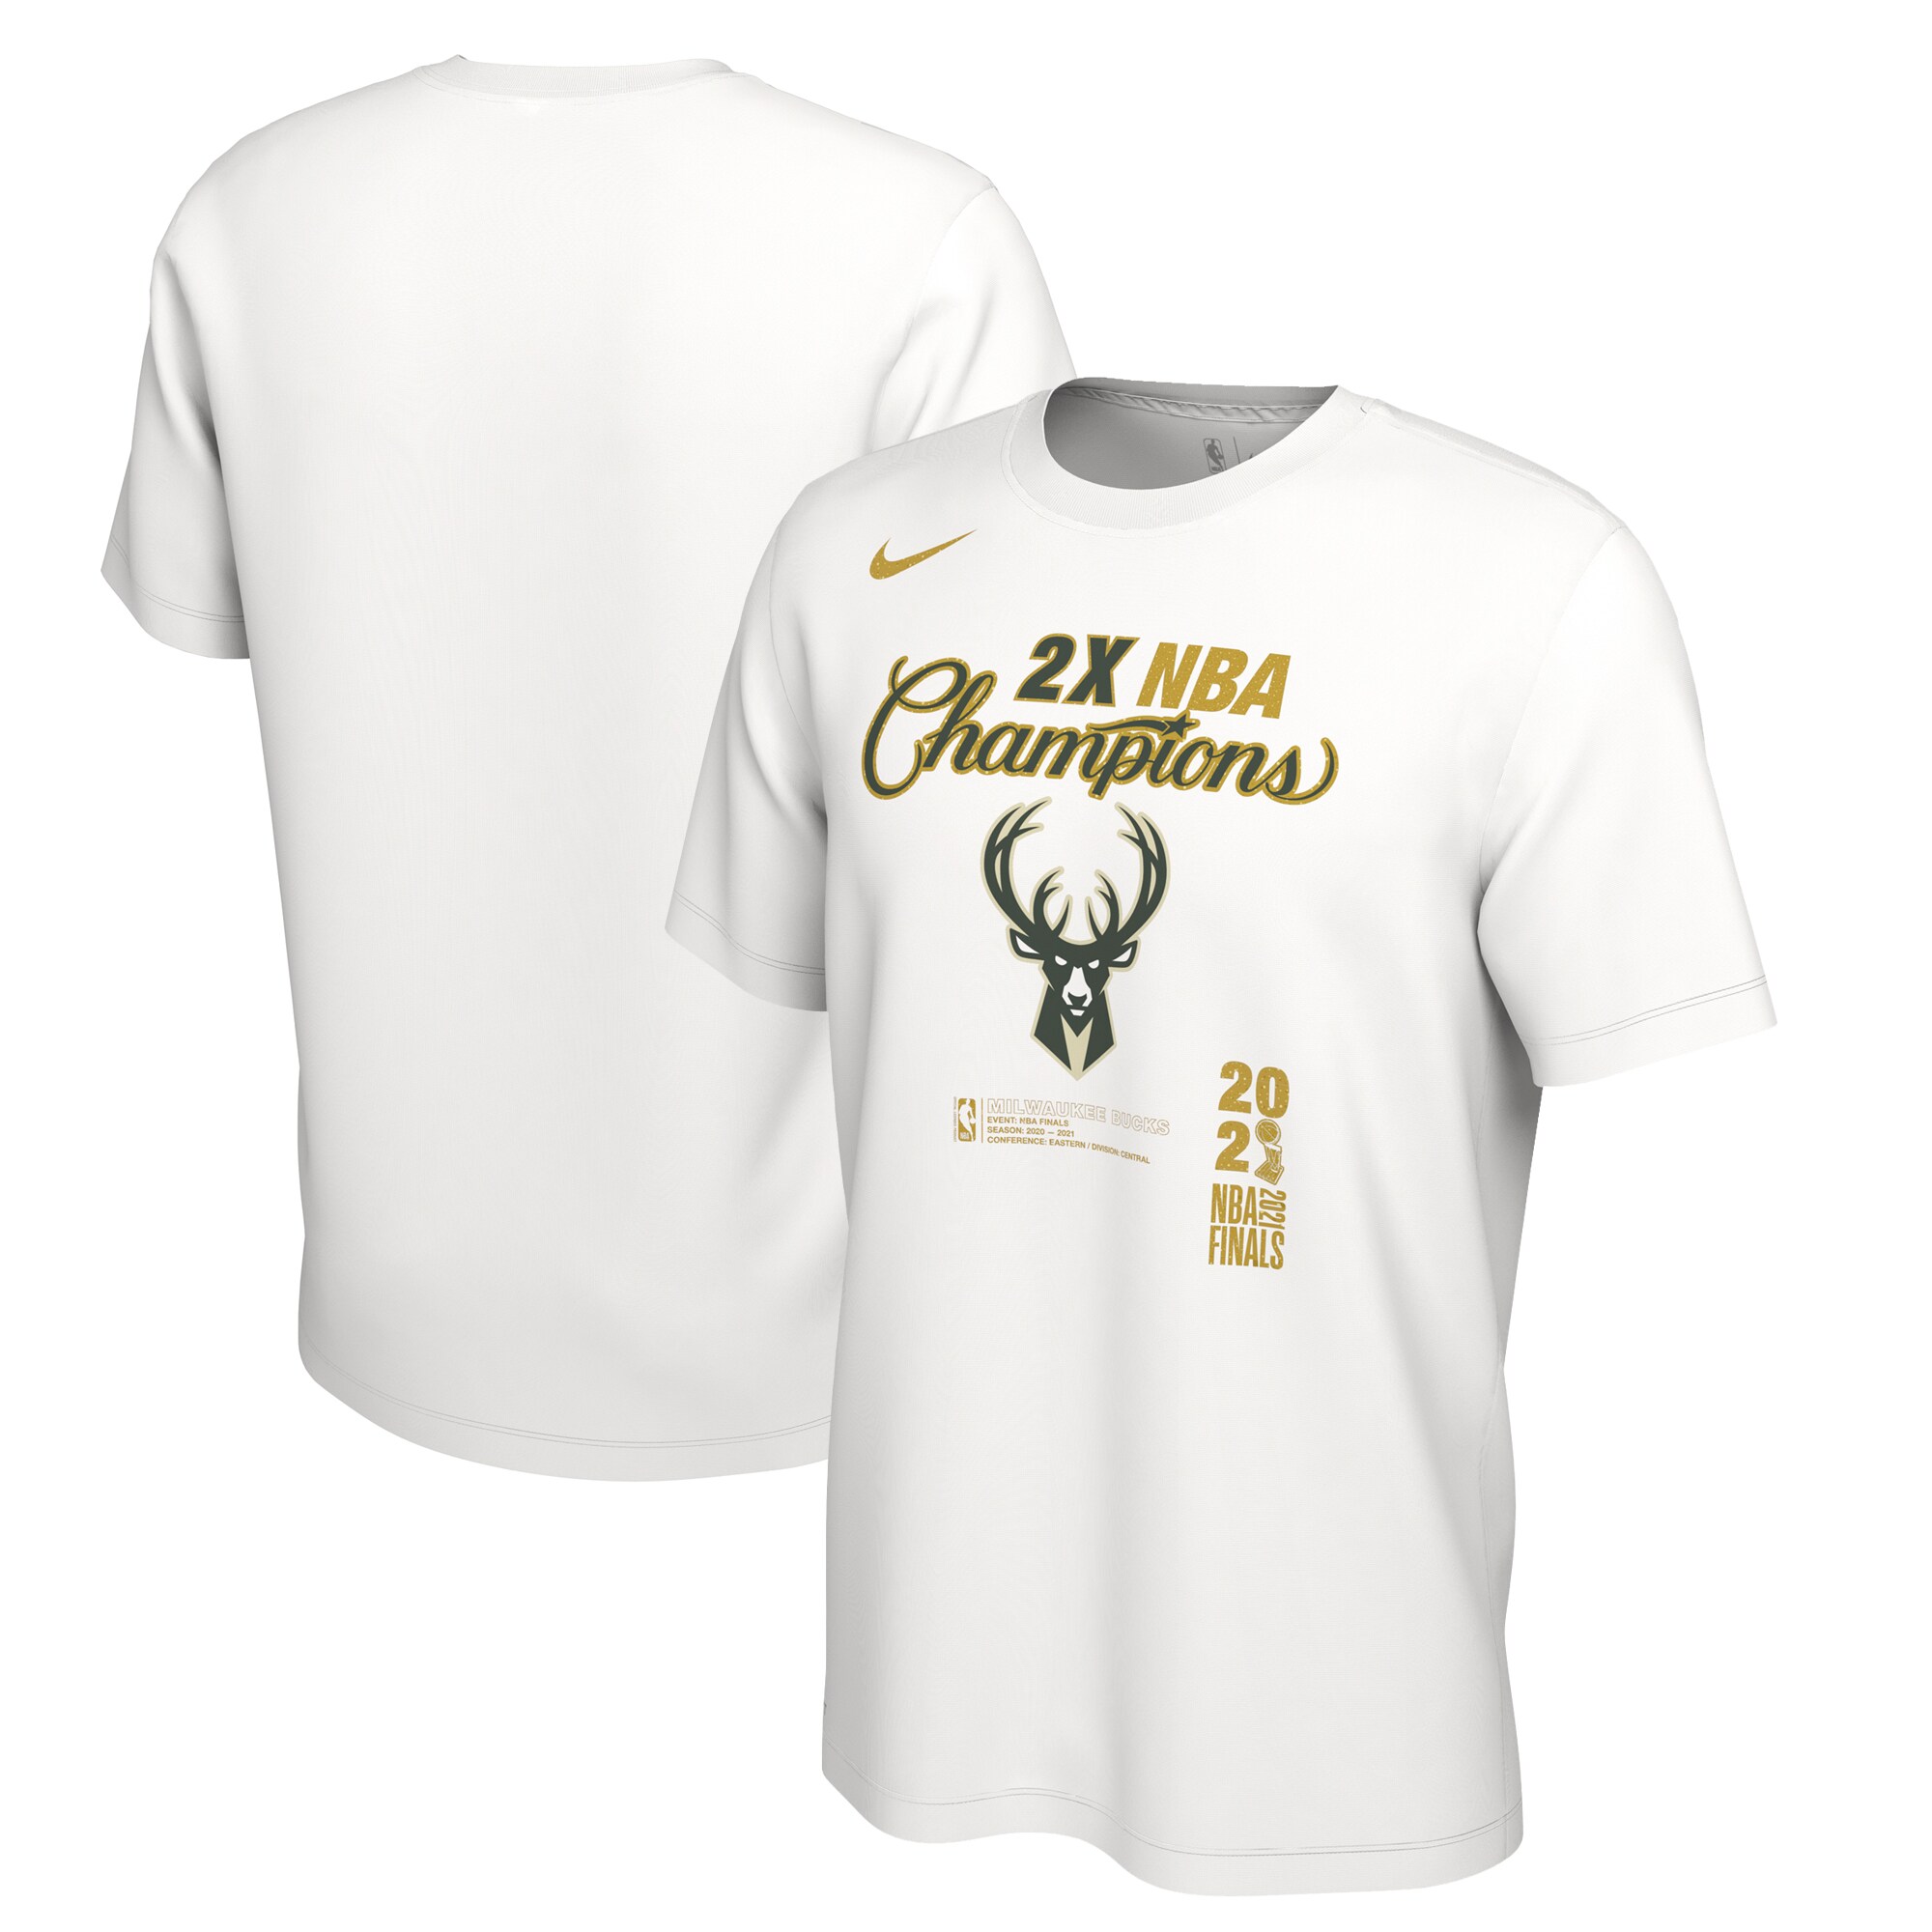 The Milwaukee Bucks are NBA Champions. Time to gear up.